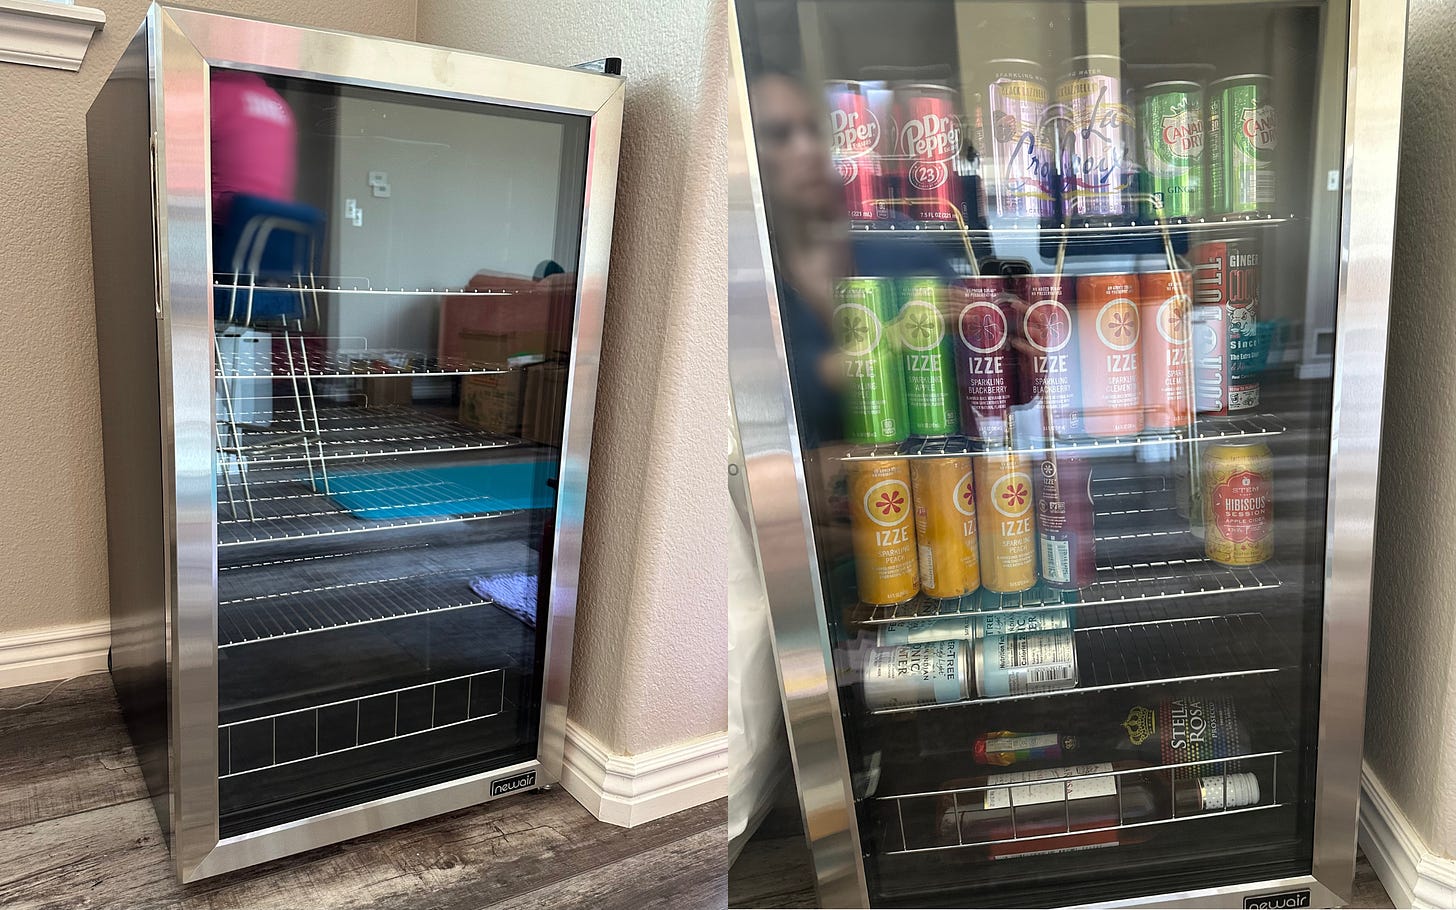 Two photos side by side where the first depicts a small beverage fridge that's empty and the second shows the same fridge stocked with cans and bottles